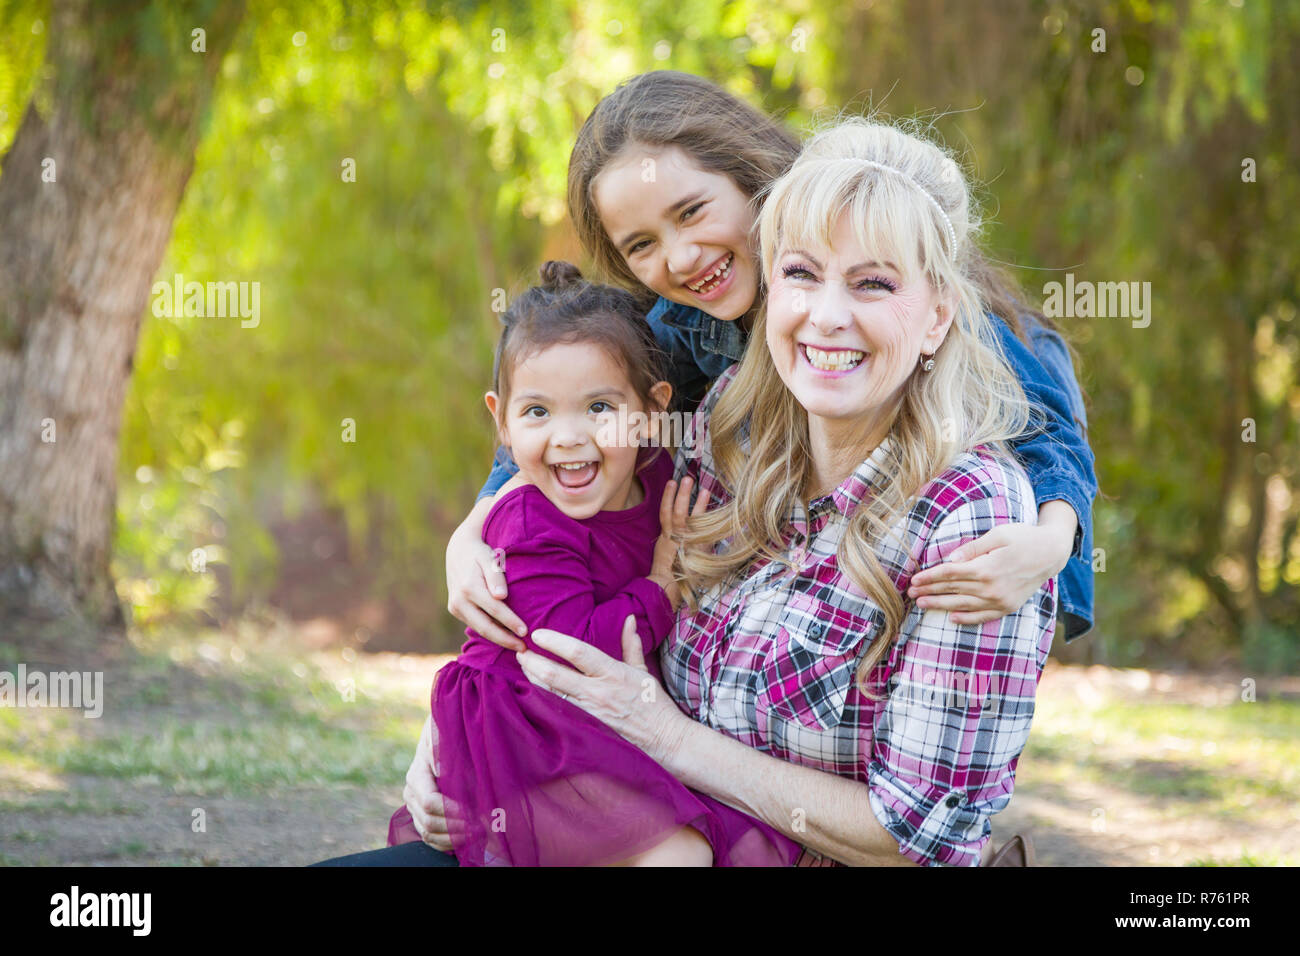 Caucasian Grandmother With Young Mixed Race Grandaughters Outdoors. Stock Photo